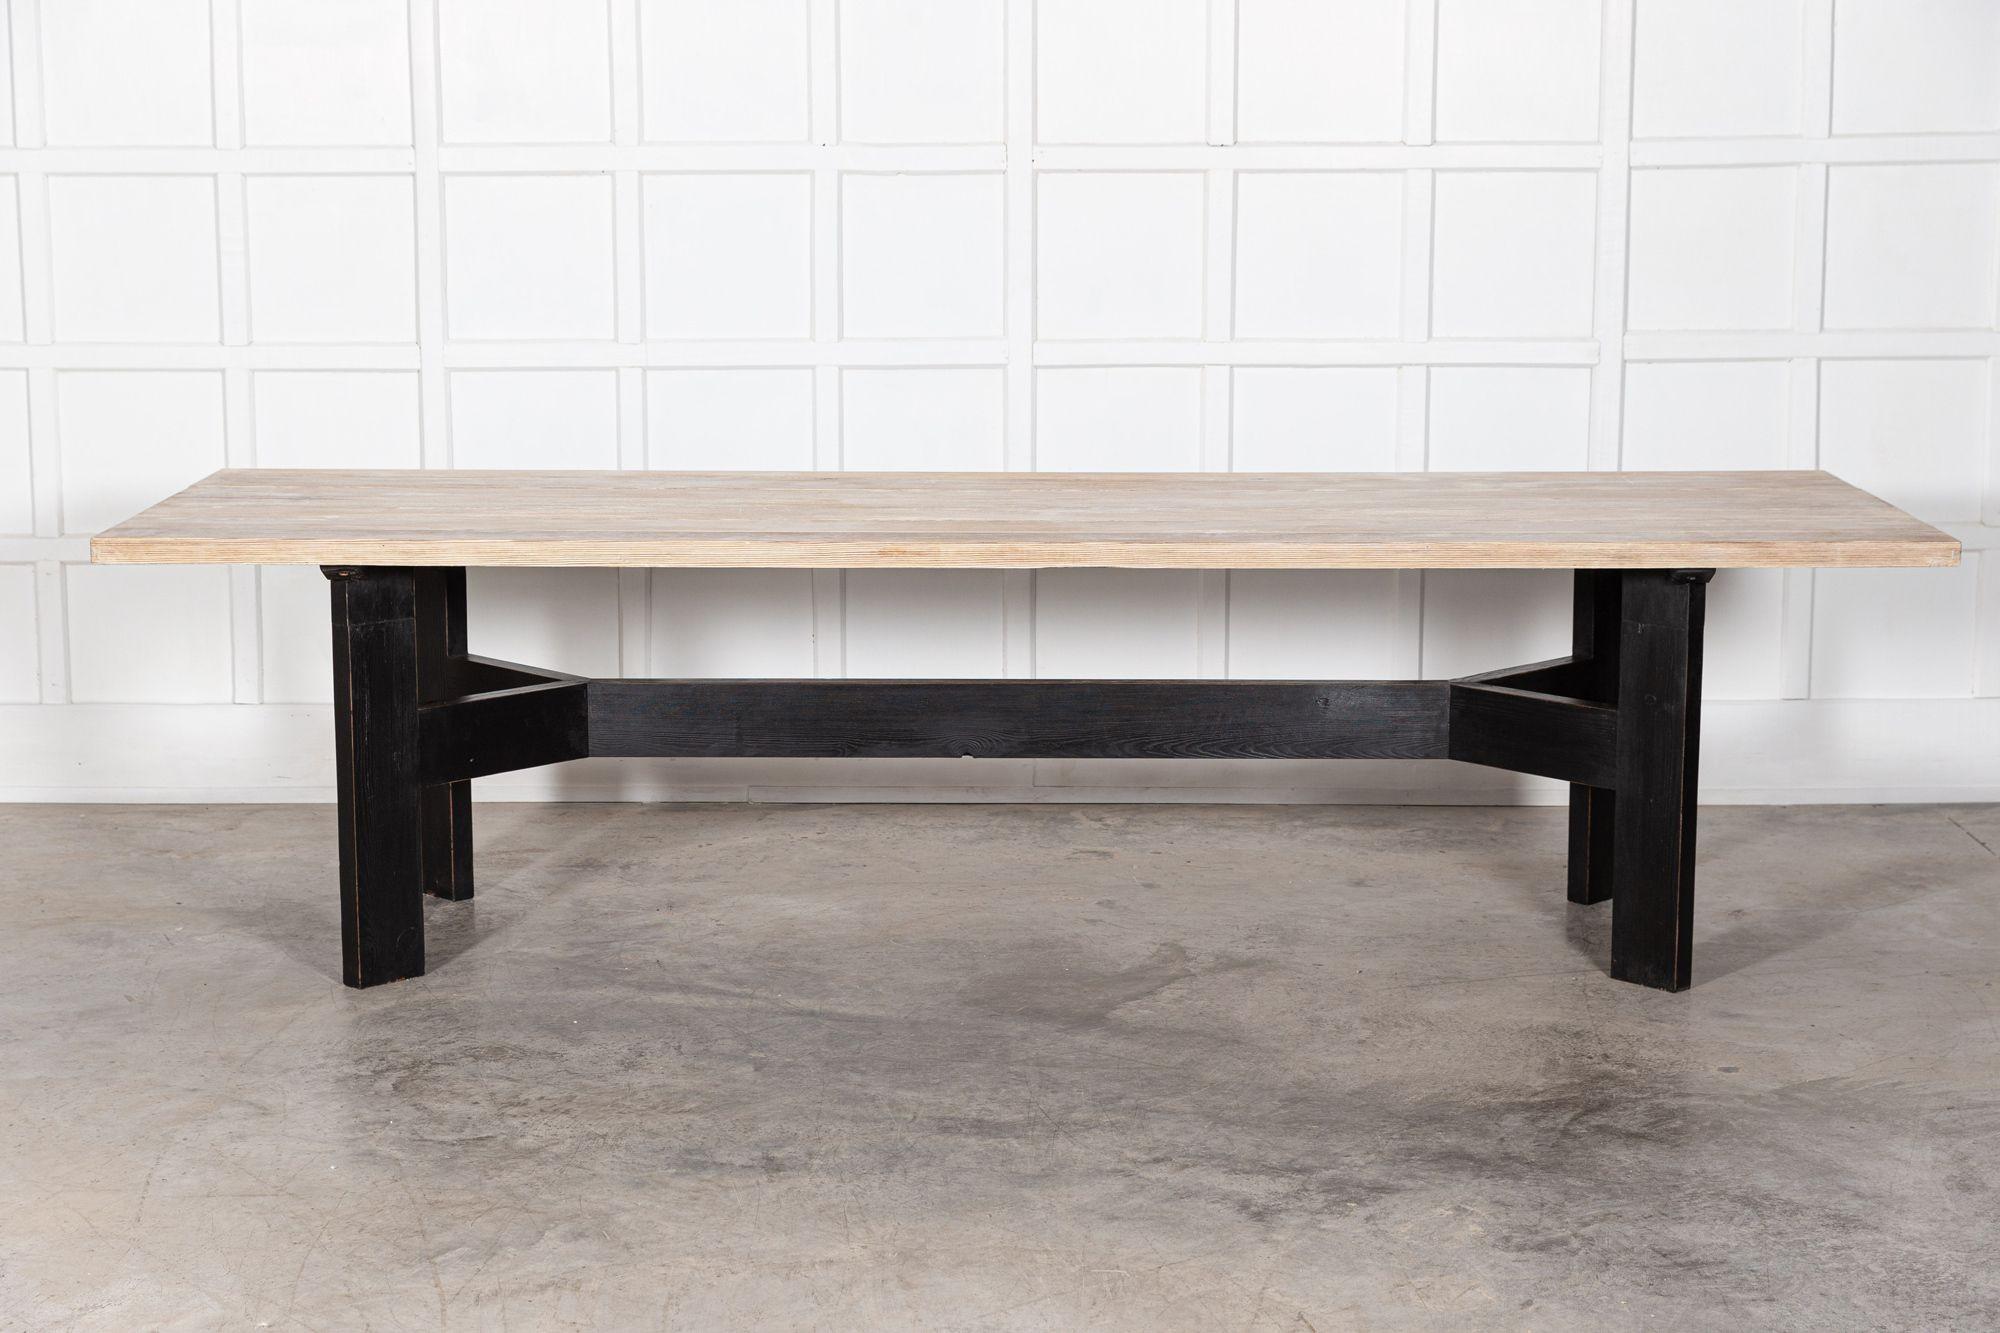 circa 1970
Monumental English ebonised Bleached Brutalist Pine dining table
Exceptional form and scale
(Top is removable)
Measures: W 303 x D 97 x H 78 cm.
  